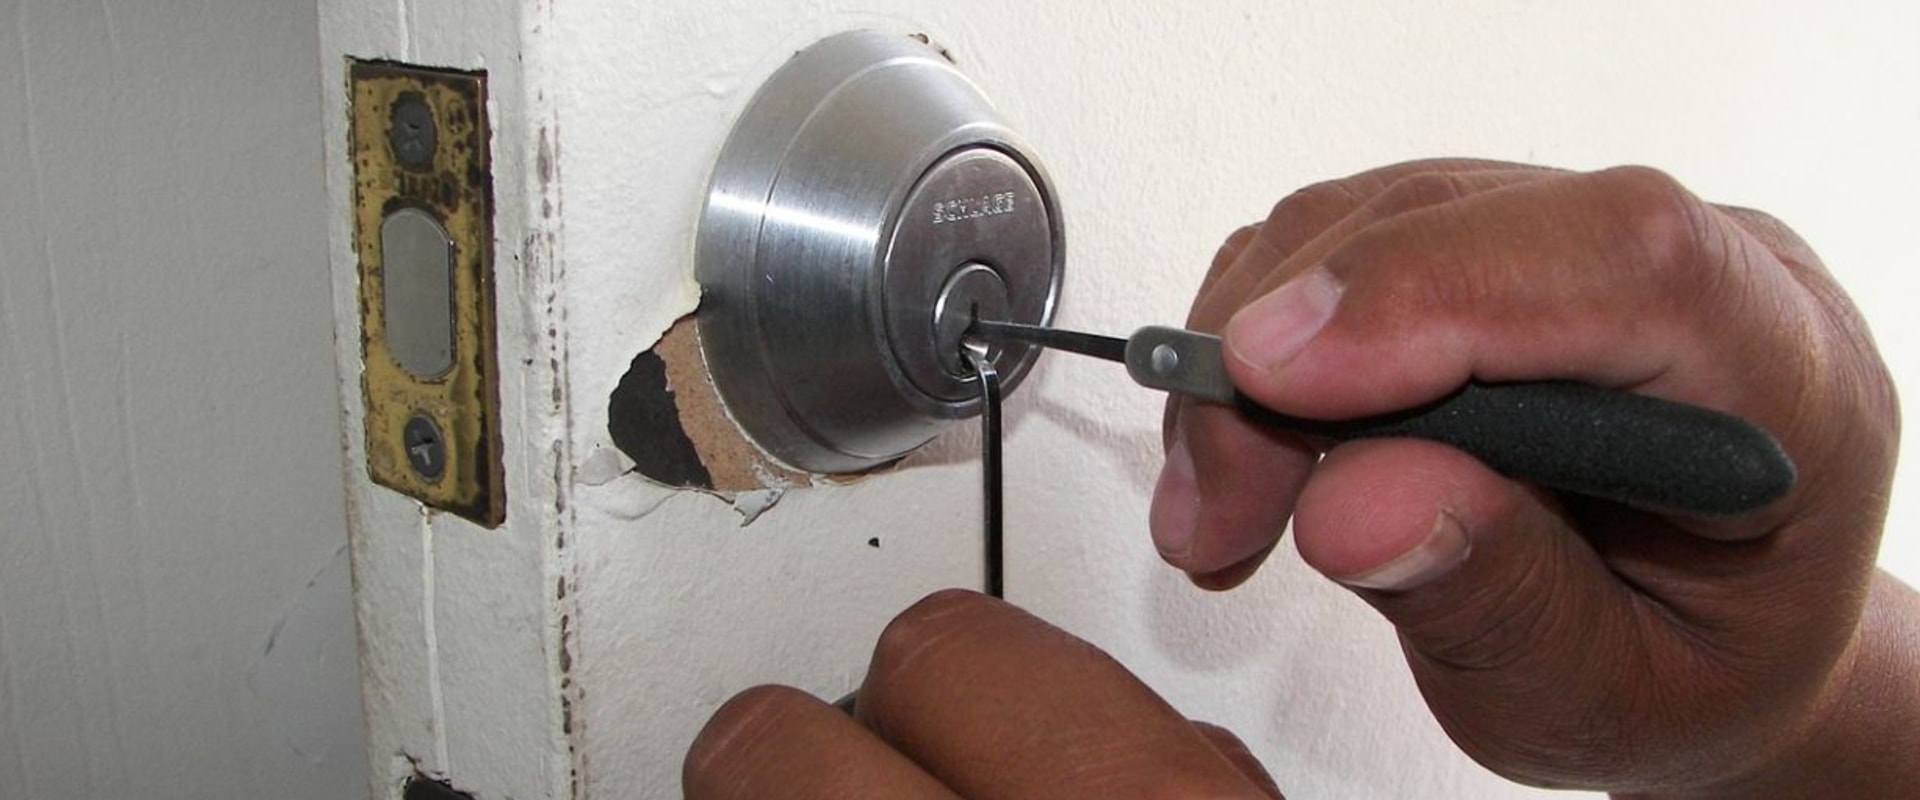 What happens when you get a locksmith?